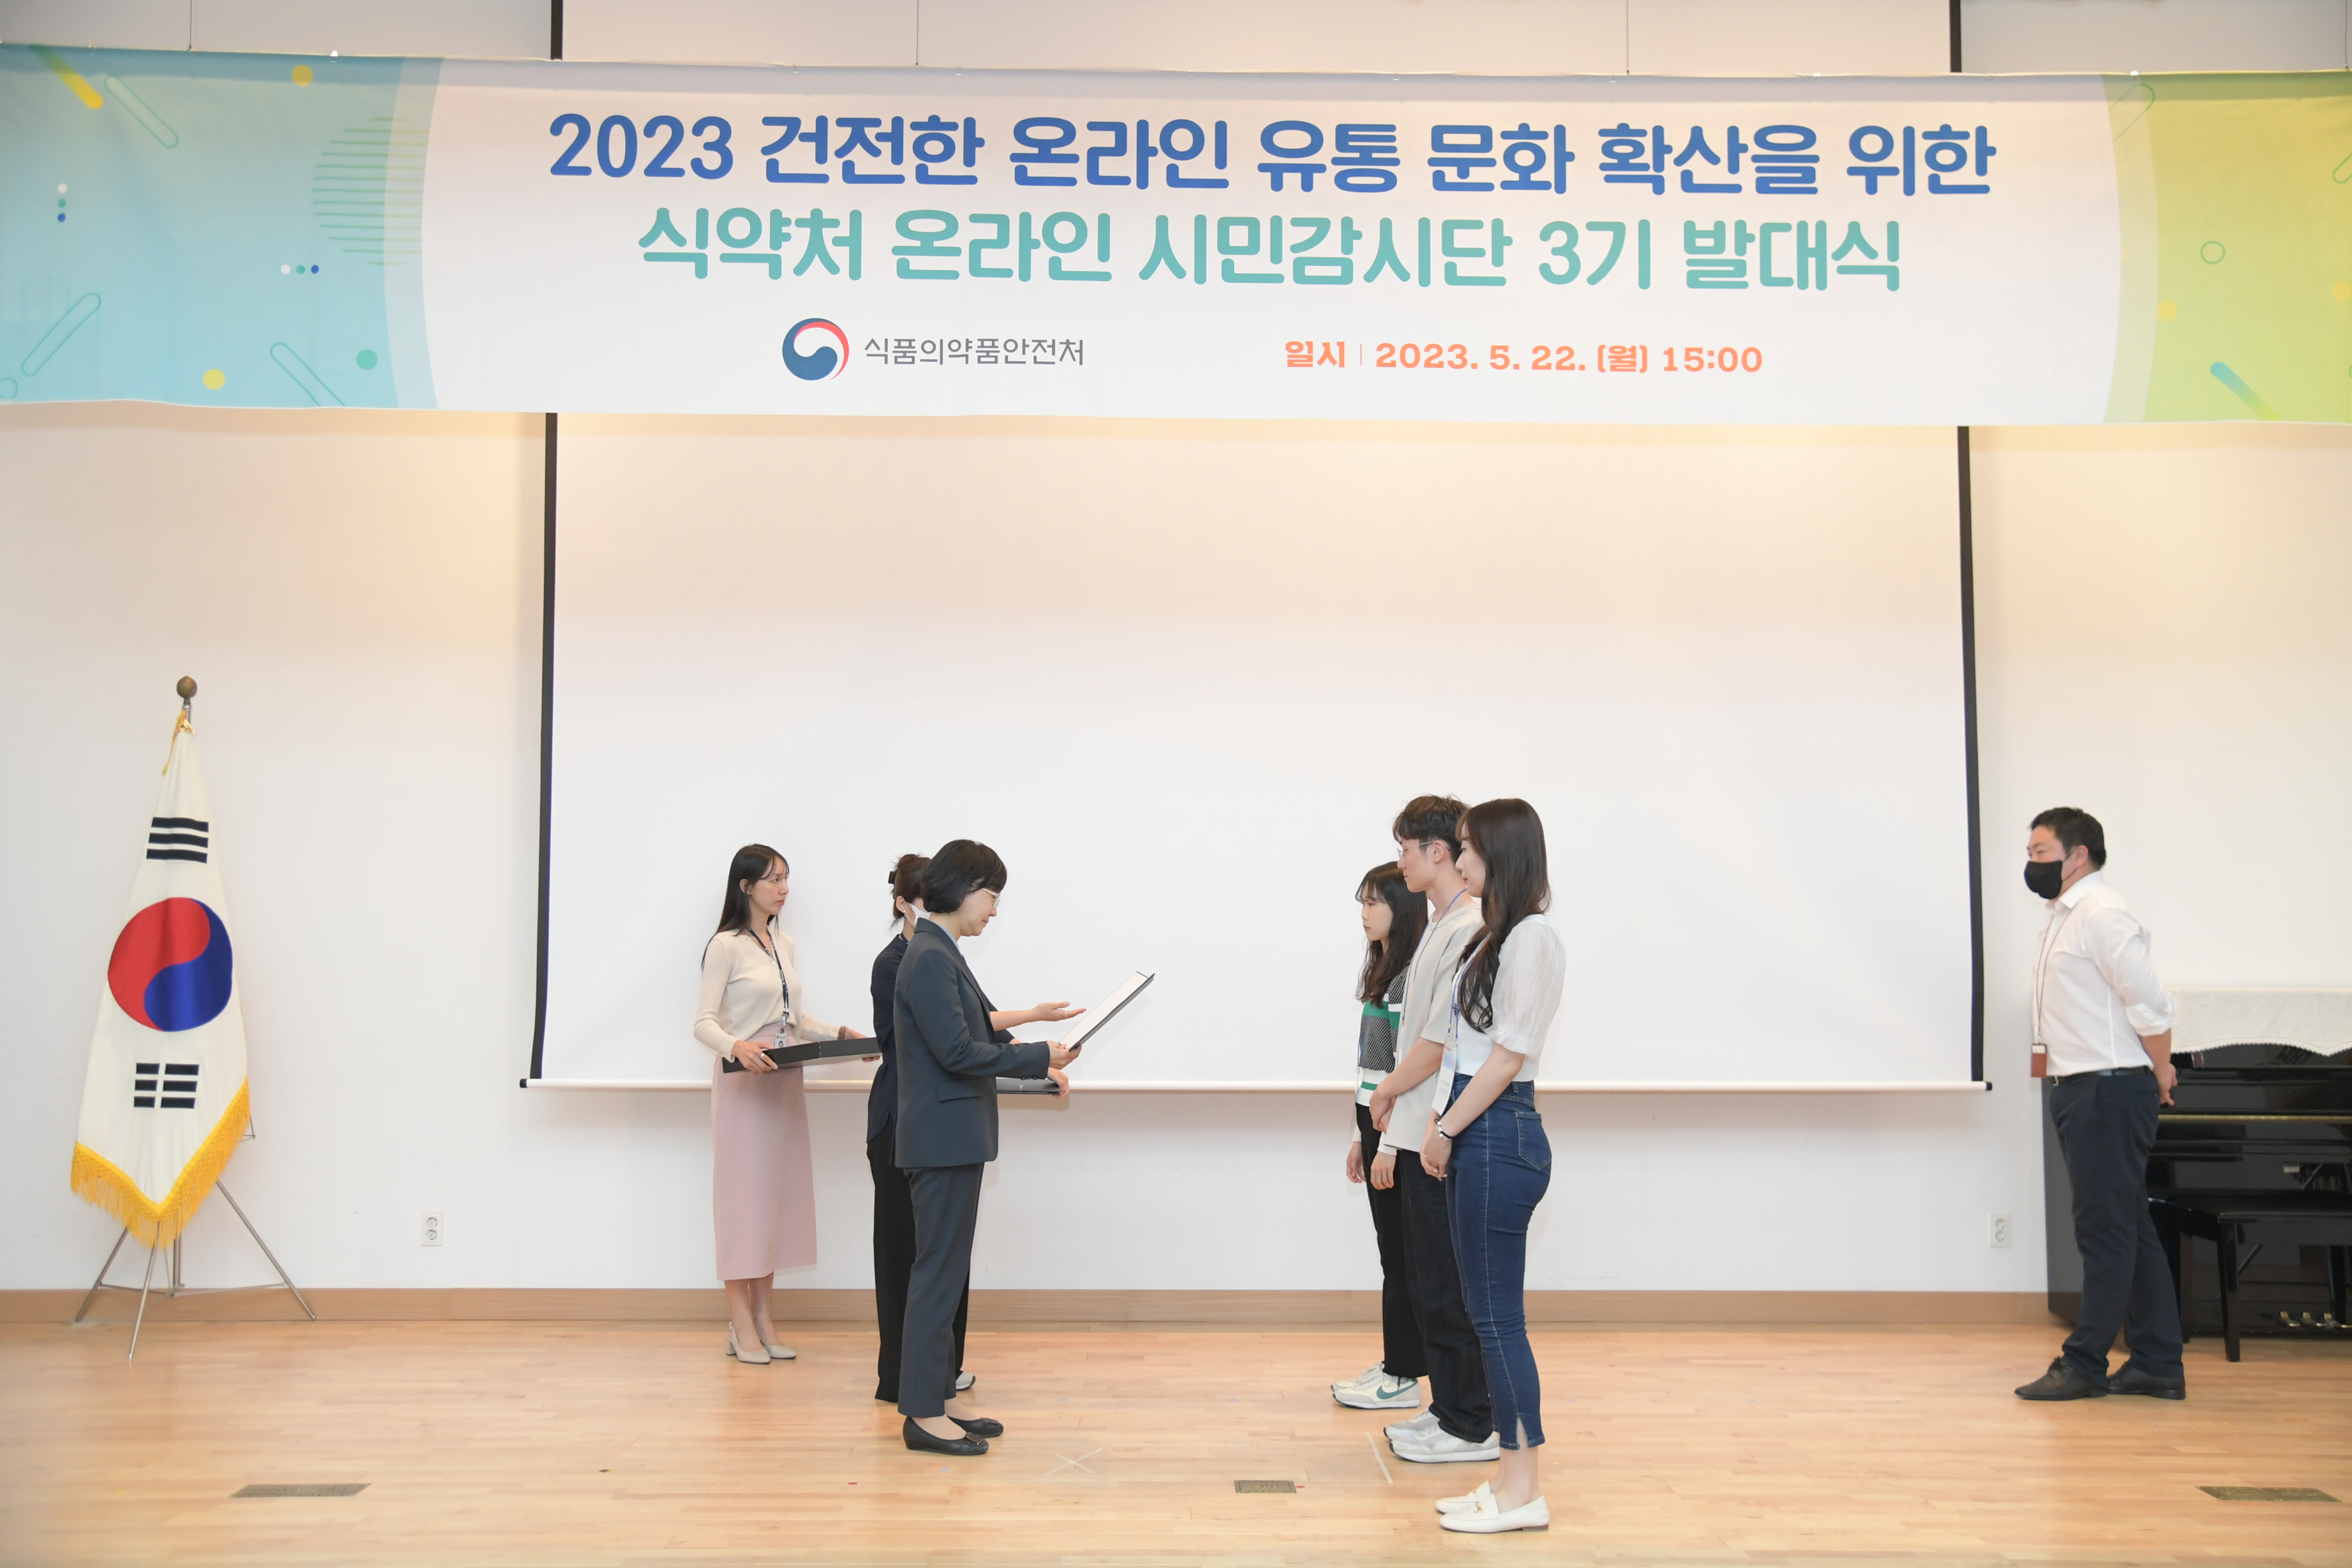 Photo News2 - [May 22, 2023] Minister Attends Launching Ceremony of 3rd Online Citizen Monitoring Group